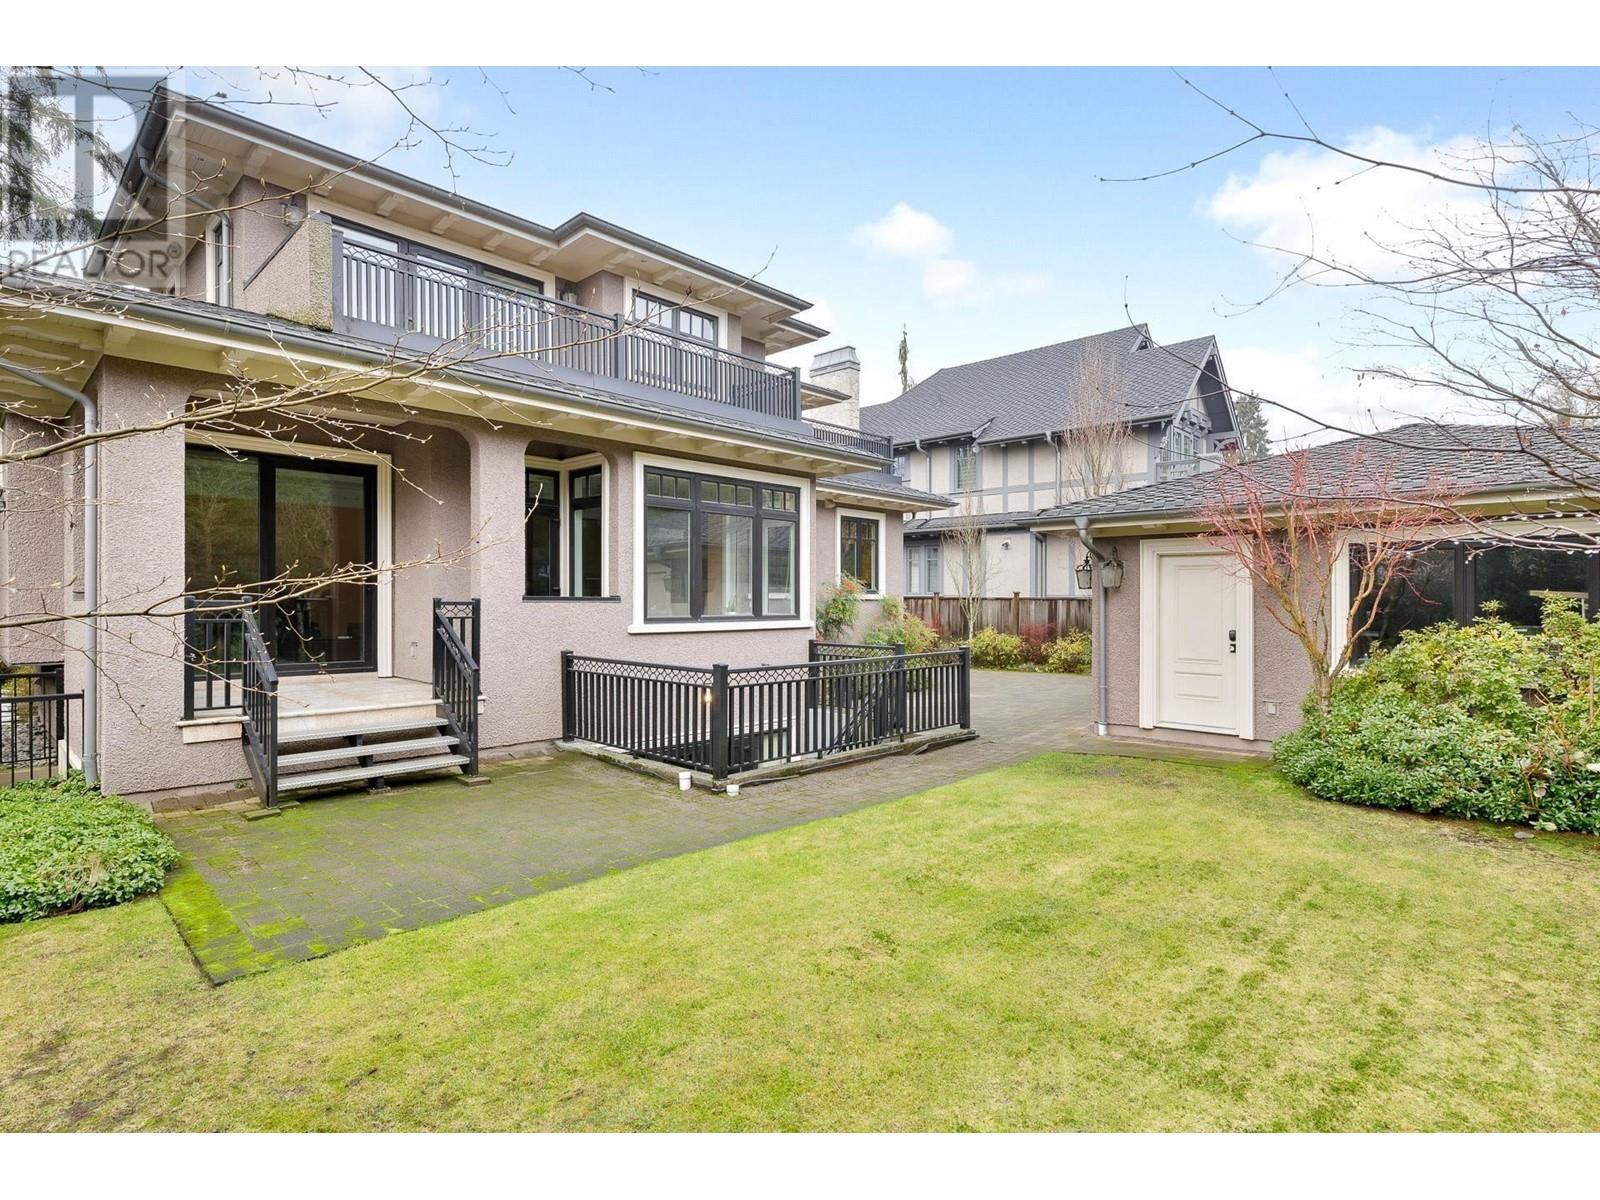 Listing Picture 35 of 37 : 5826 ANGUS DRIVE, Vancouver / 溫哥華 - 魯藝地產 Yvonne Lu Group - MLS Medallion Club Member